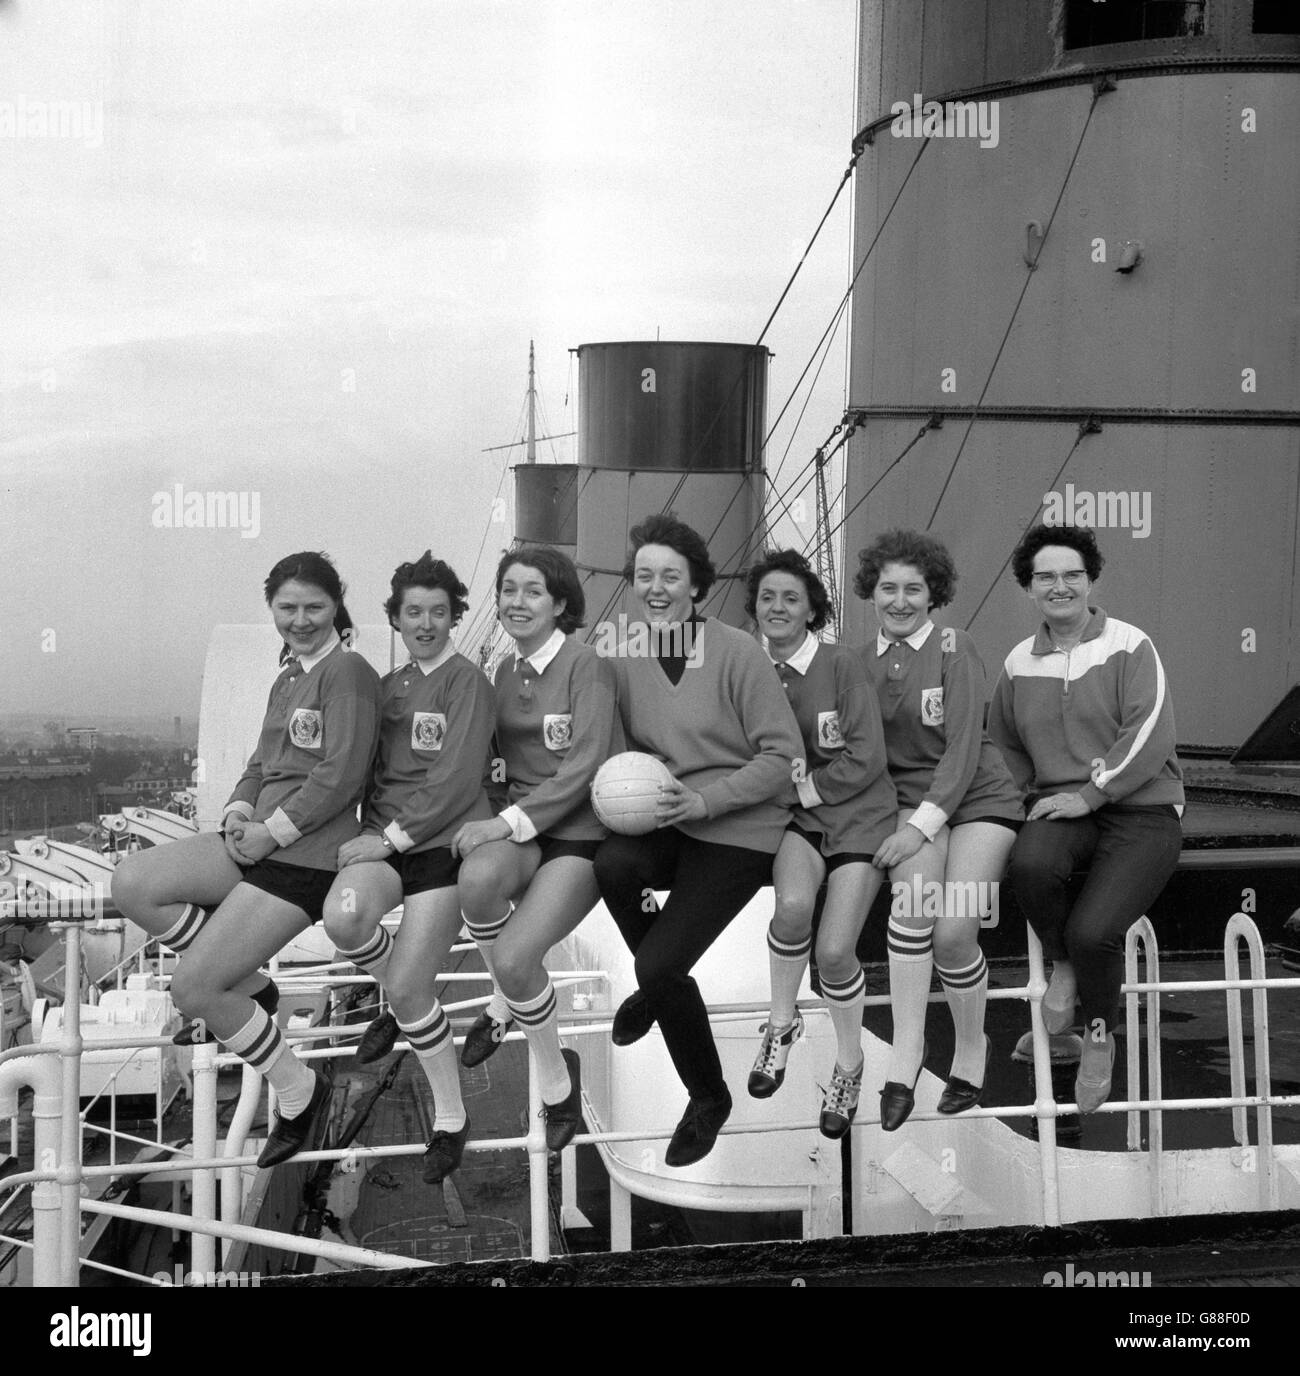 A newly-formed women's soccer team take a break from training on the sun deck of the Cunard liner Queen Mary at Southampton. The team play their first match at Southampton Sports Centre on Sunday, against Royal Exchange Insurance Ladies. (l-r) Margot Fruauf of Clifton, Helen Fitzpatrick of Southampton, Alexandra Oliver of Hampshire, Anne Rowles of Hounslow, Greta Martin of Southampton, Jennifer Ife of Castle Gresley and Marie Semple of Southampton. Stock Photo